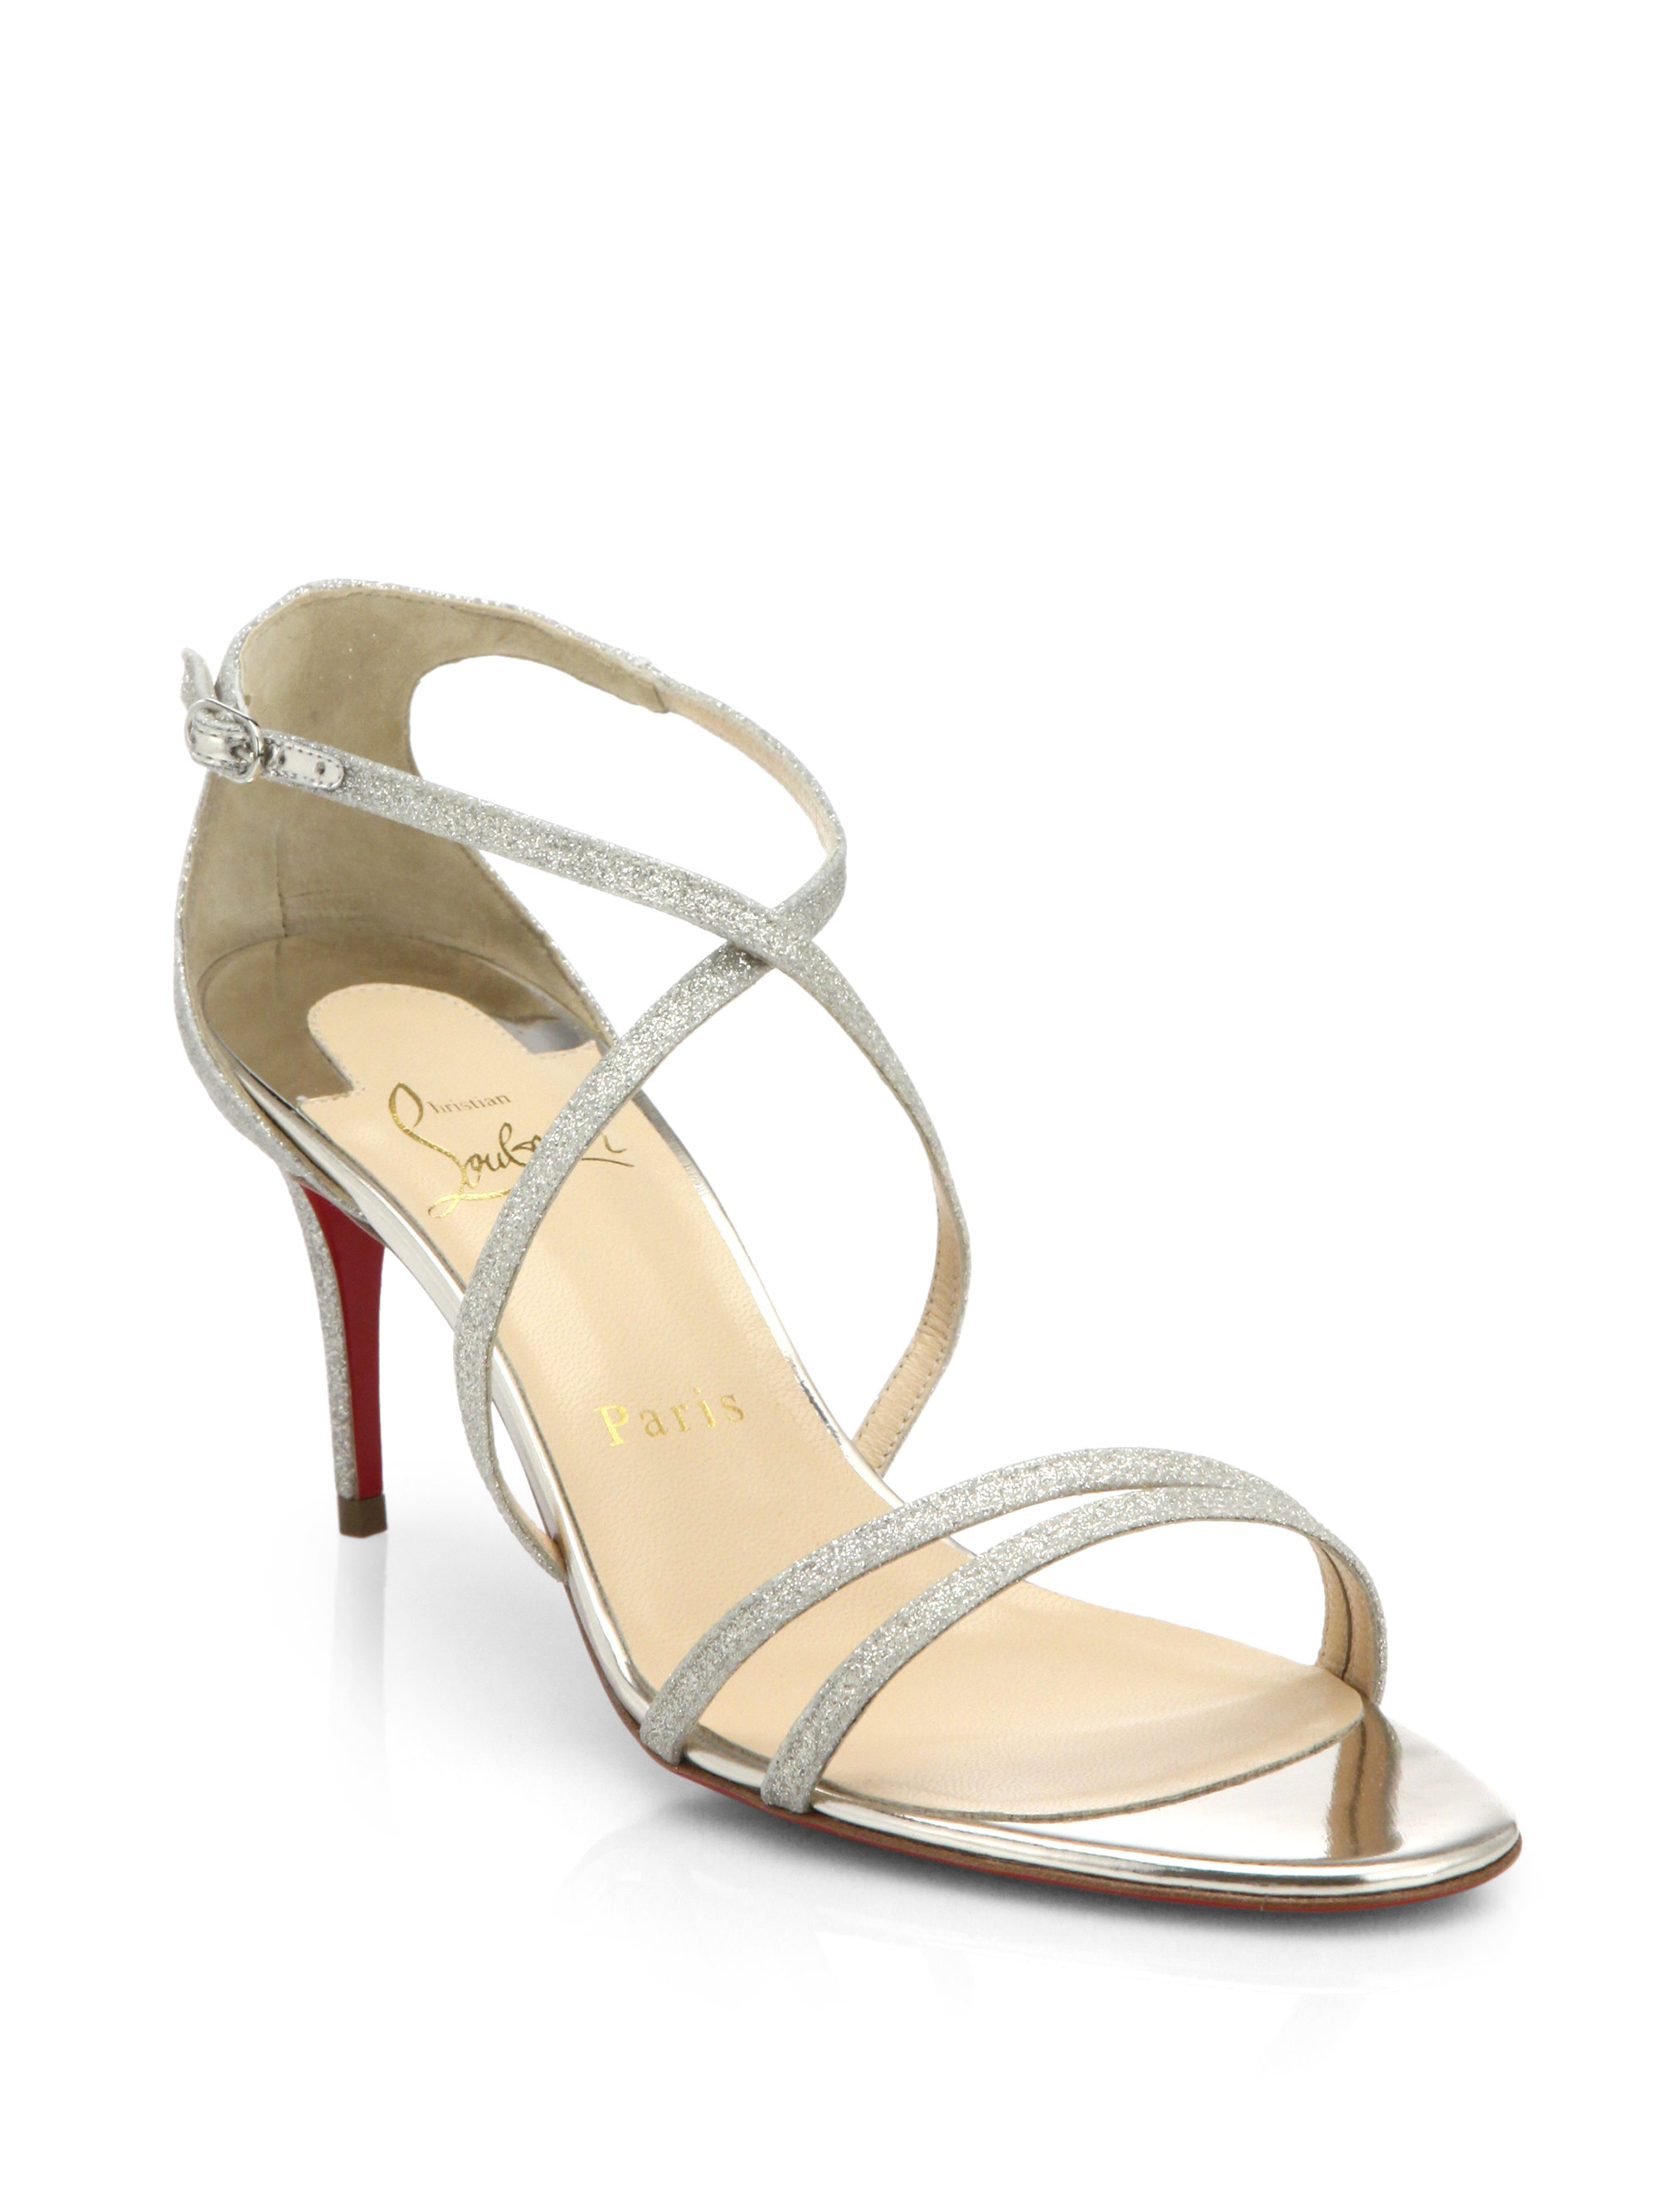 Christian louboutin Gwinee Glittered Leather Sandals in White ...